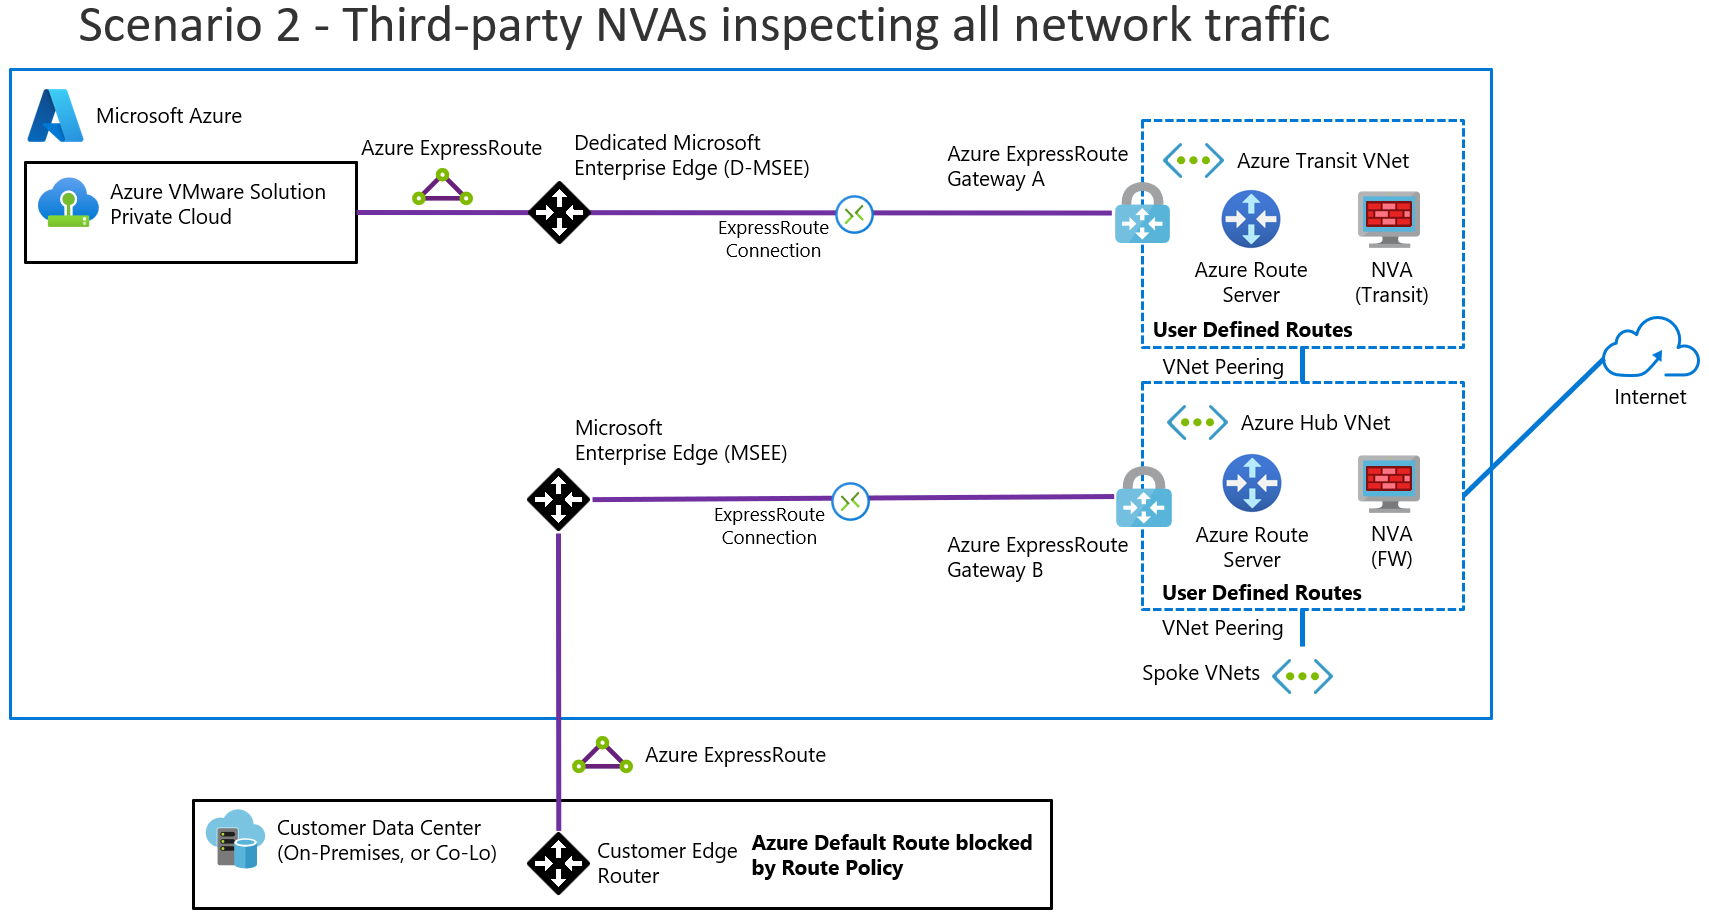 Diagram of overview of scenario 2 with third-party NVA in hub Azure Virtual Network inspecting all network traffic.